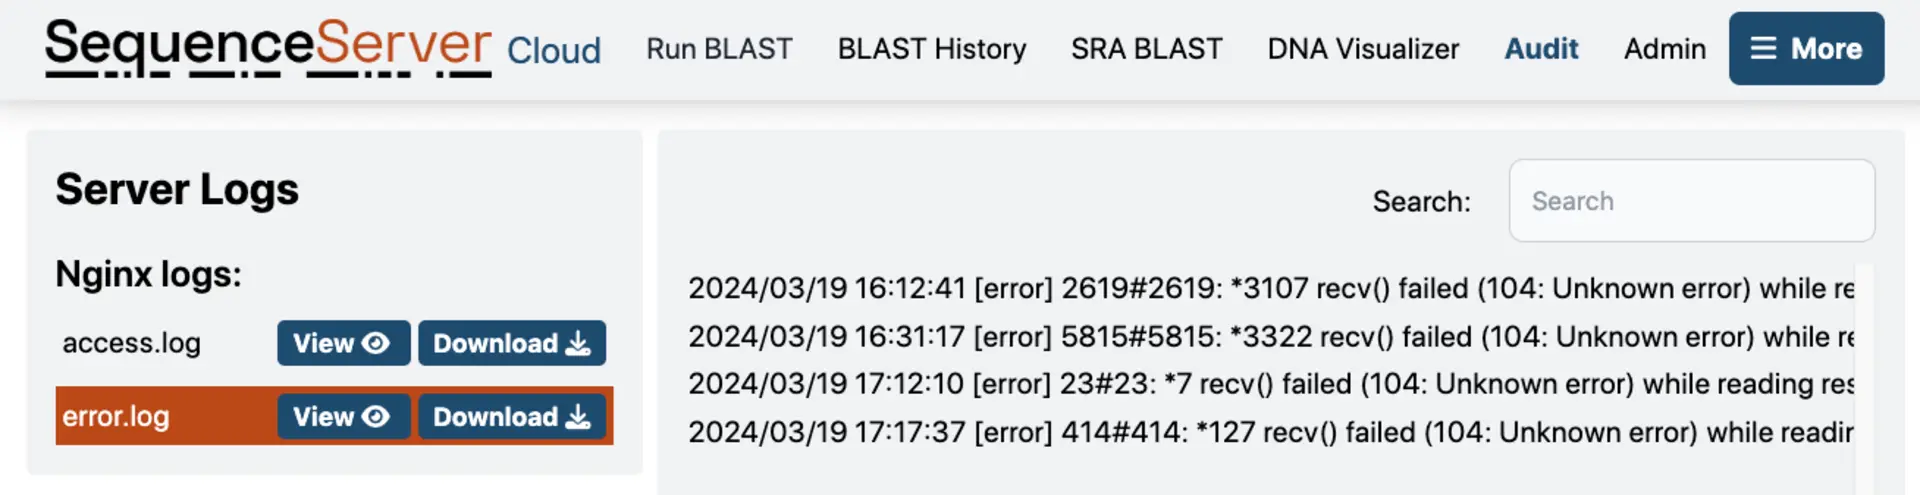 SequenceServer logs errors making it easy for you to see and record errors and identify the causes of BLAST run issues.